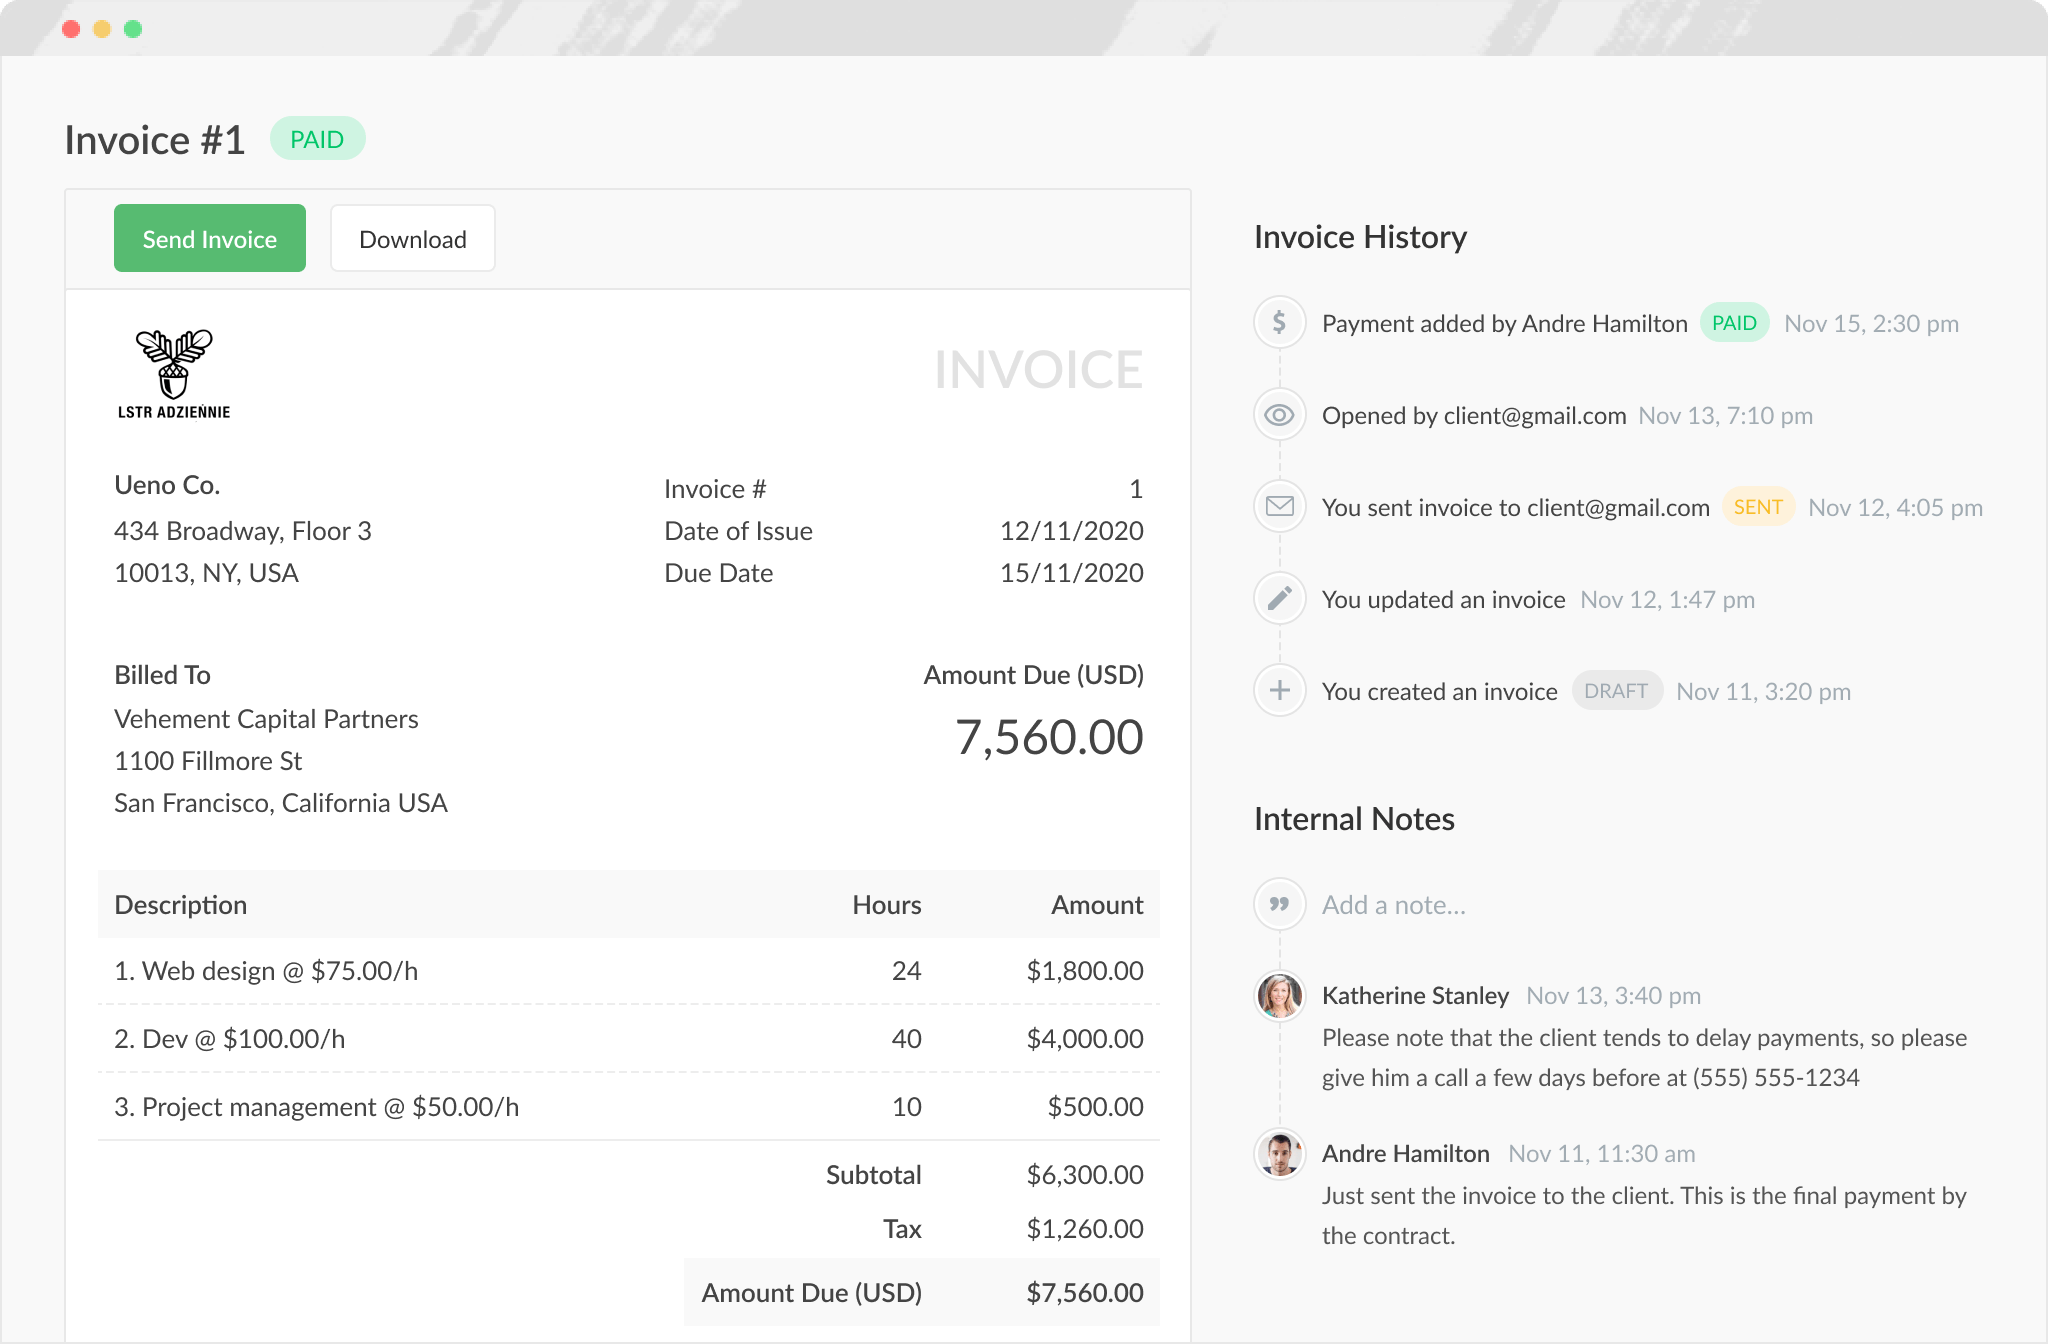 Everhour Software - Easily create an invoice based on tracked time and expenses